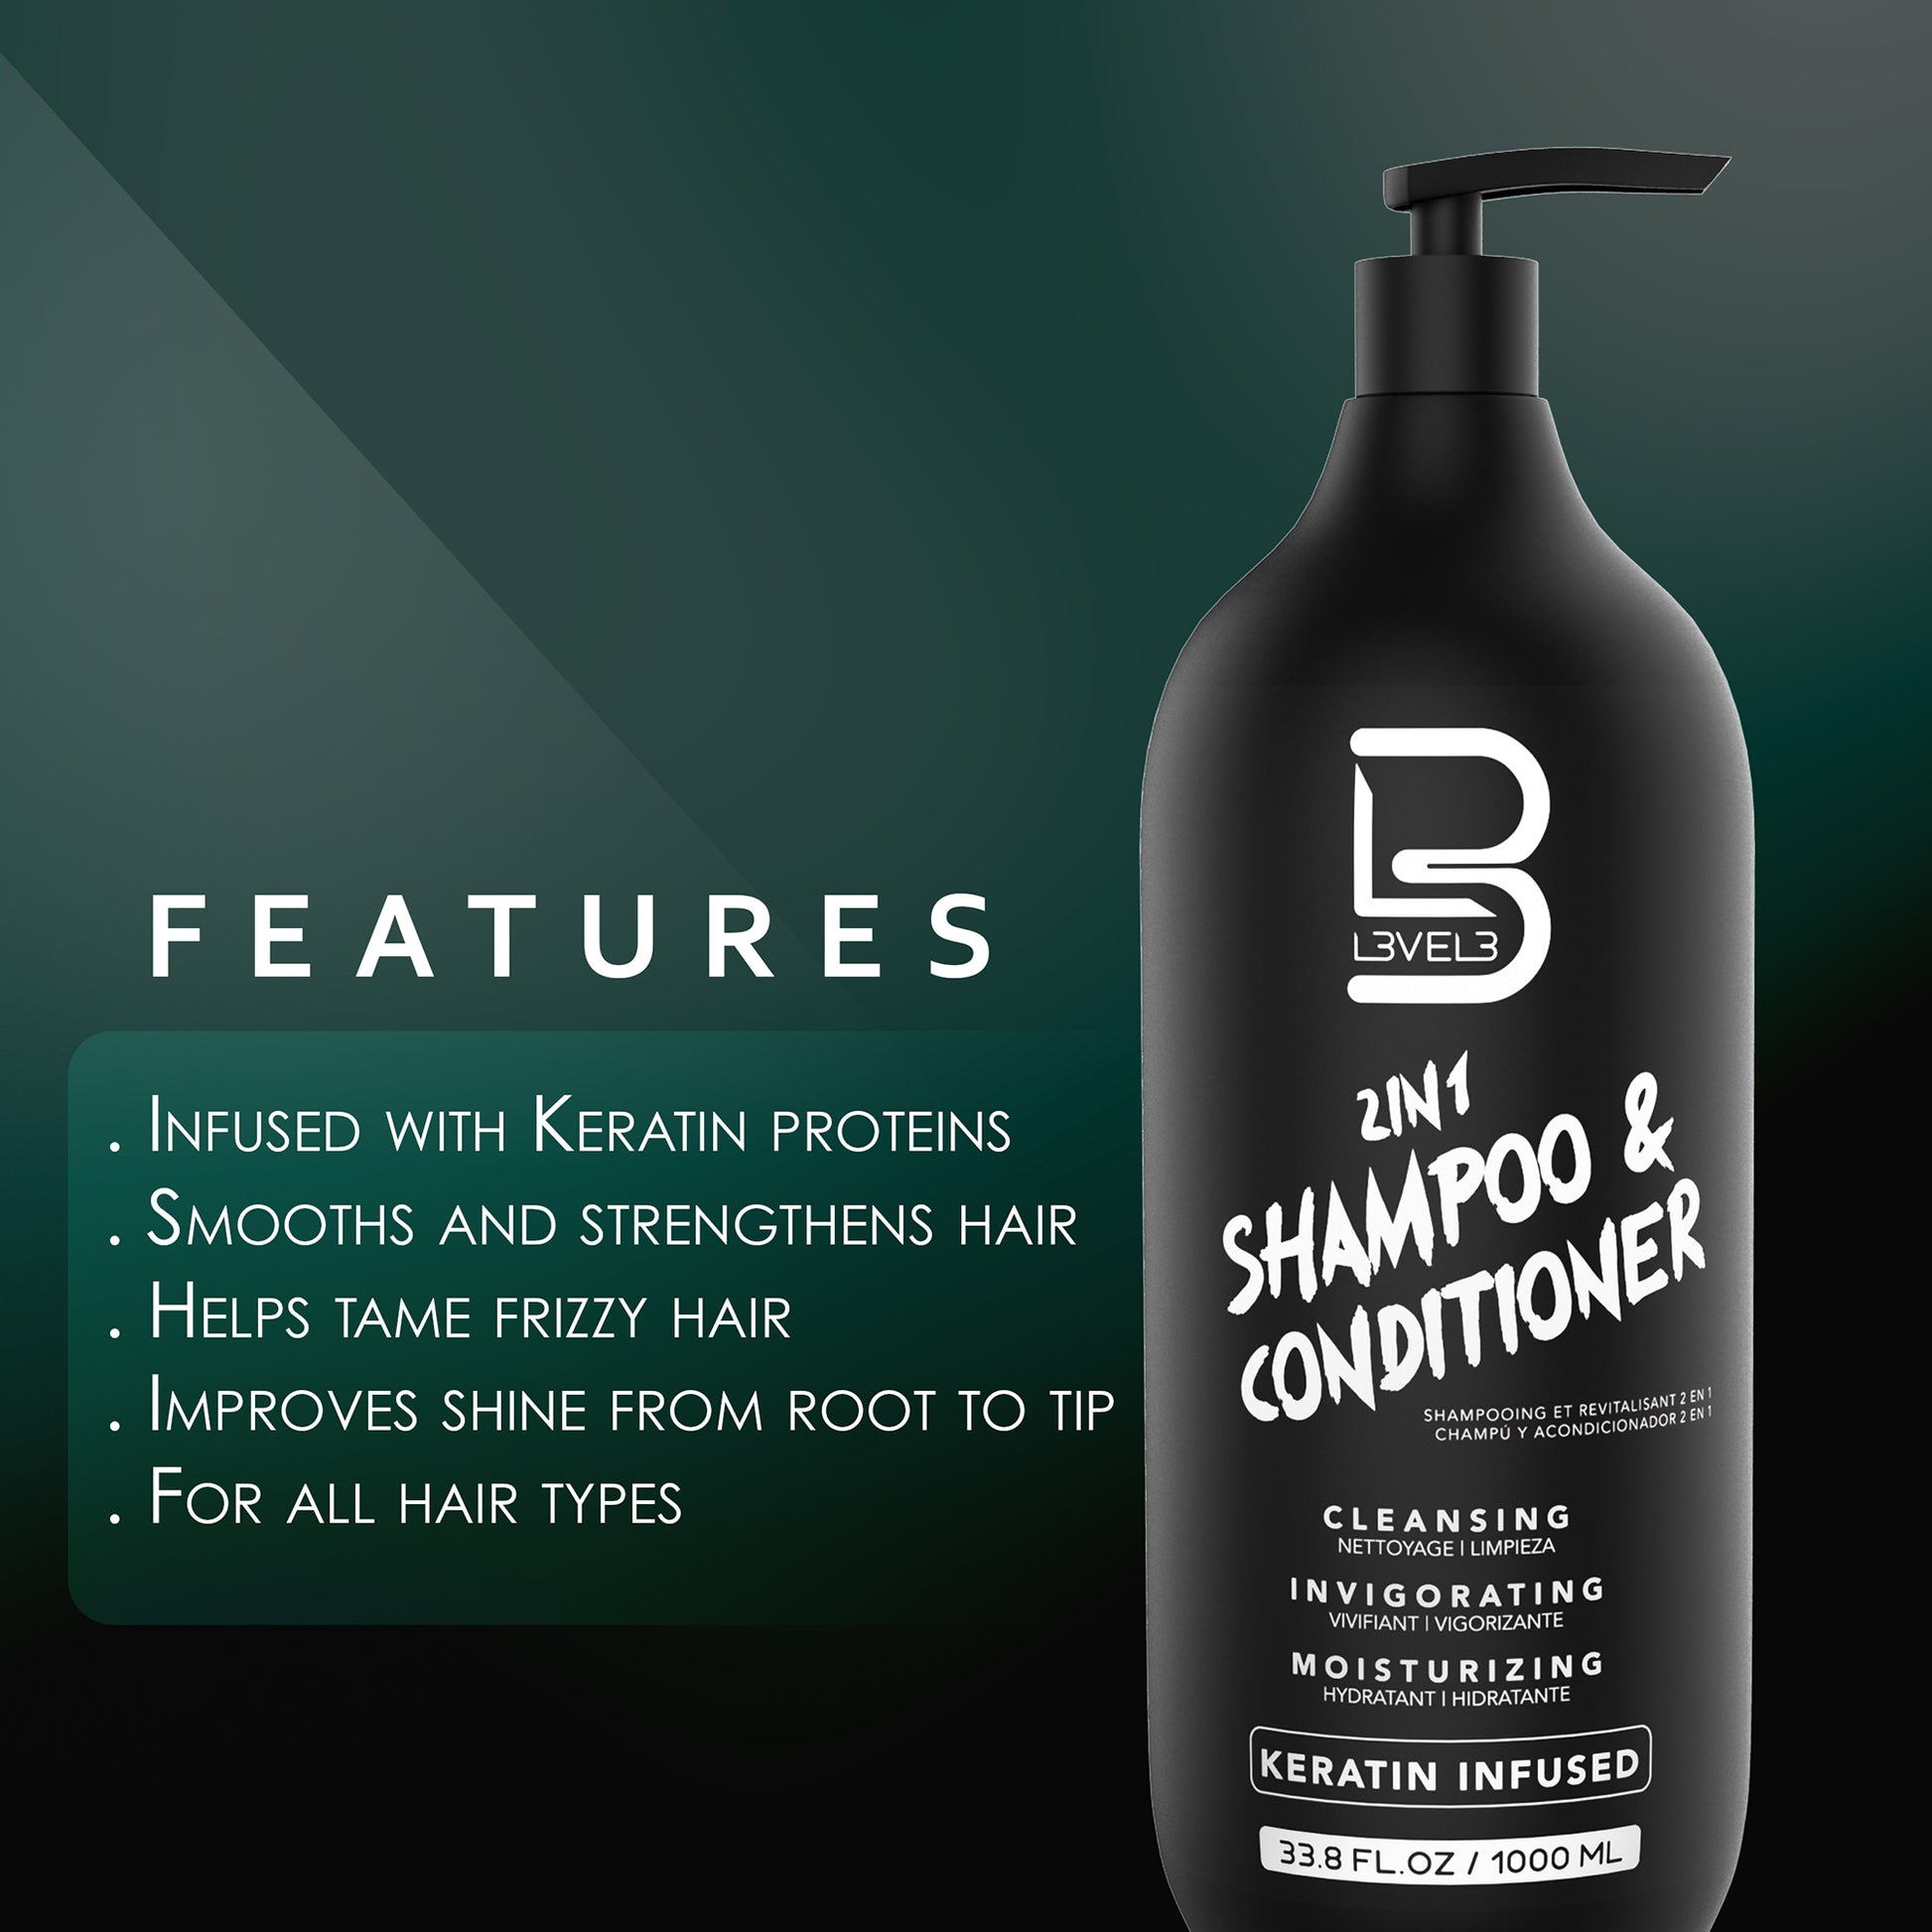  Level 3 Two in One Shampoo and Conditioner - Smooths